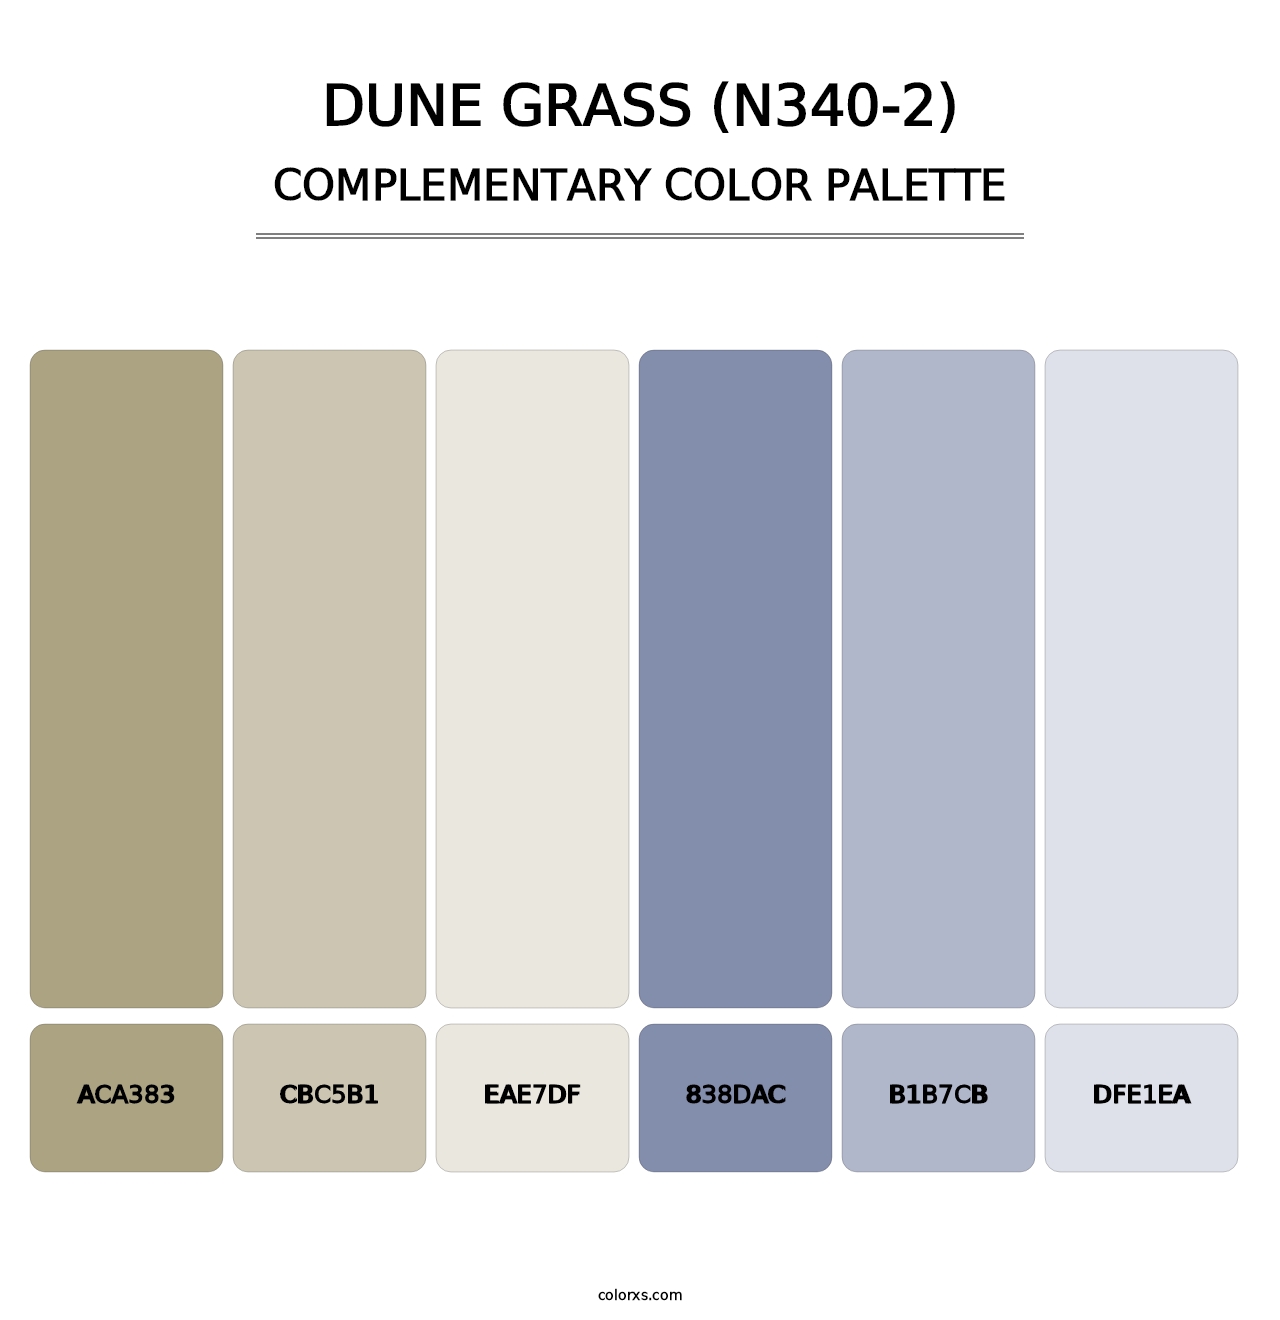 Dune Grass (N340-2) - Complementary Color Palette